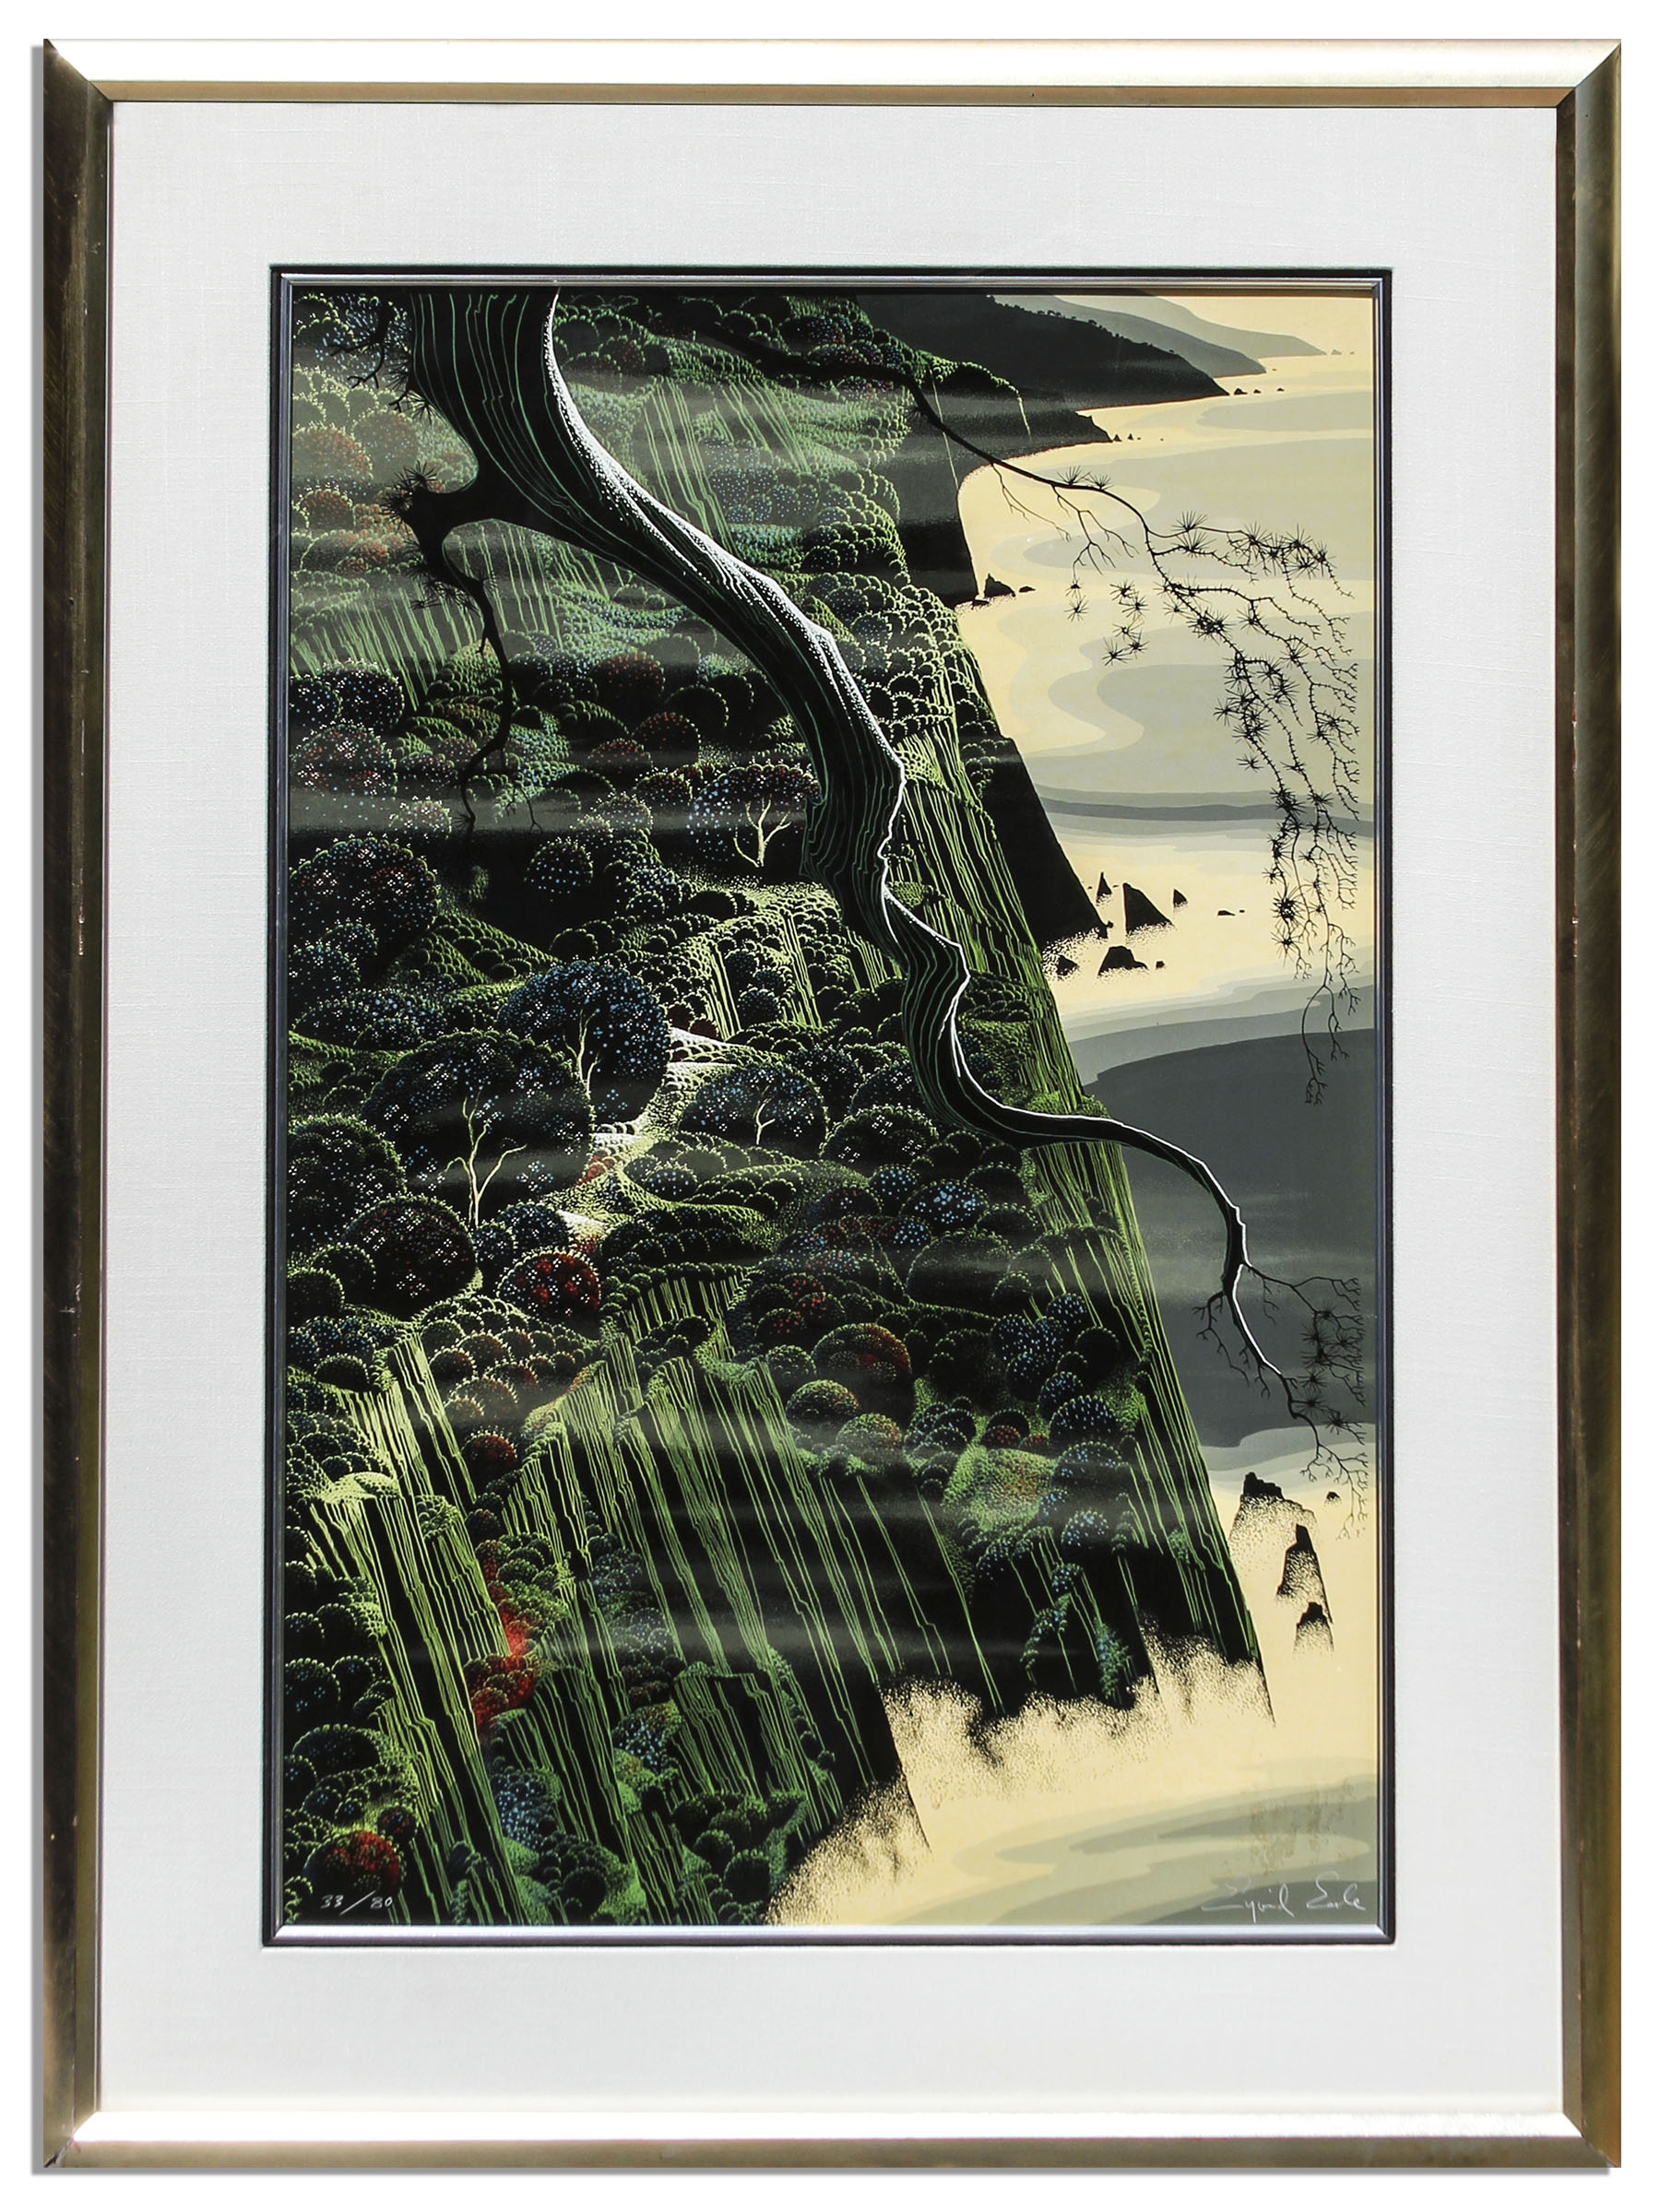 Eyvind Earle Art Ray Bradbury Personally Owned Art -- Limited Edition California Coastal Landscape Silkscreen by Eyvind Earle Titled ''From Out of The Sea''